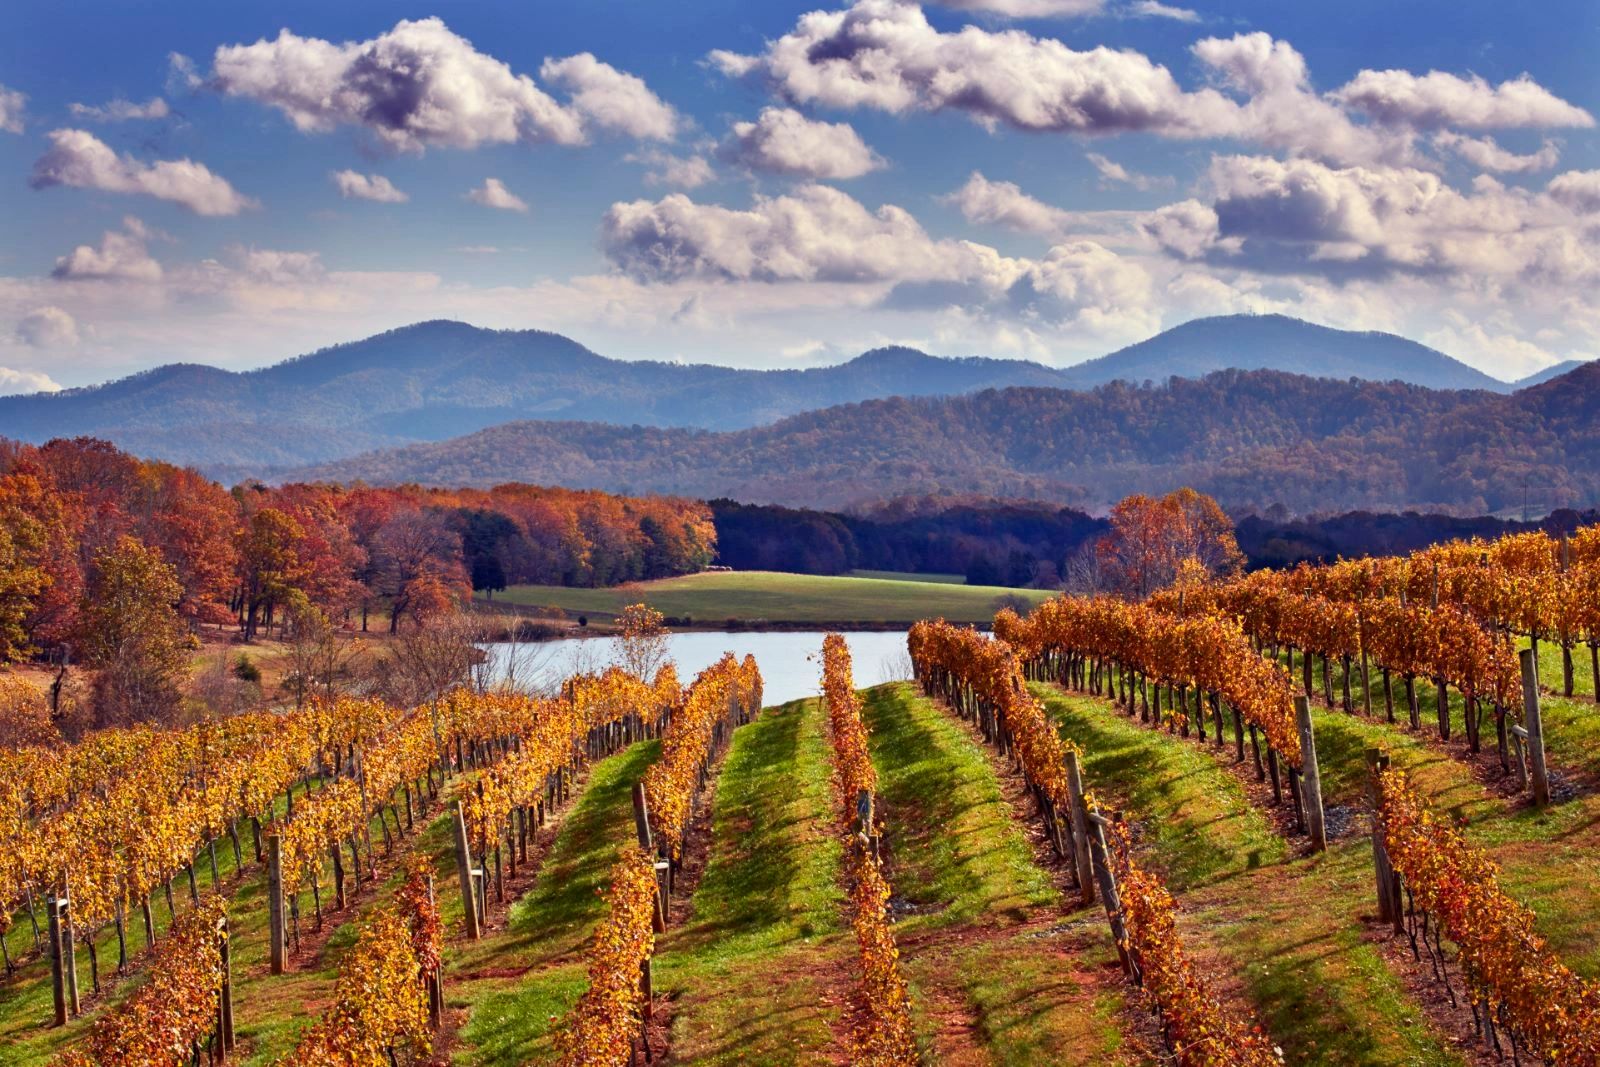 Afton Mountain Vineyards by Mick Rock, copyright Cephas.com